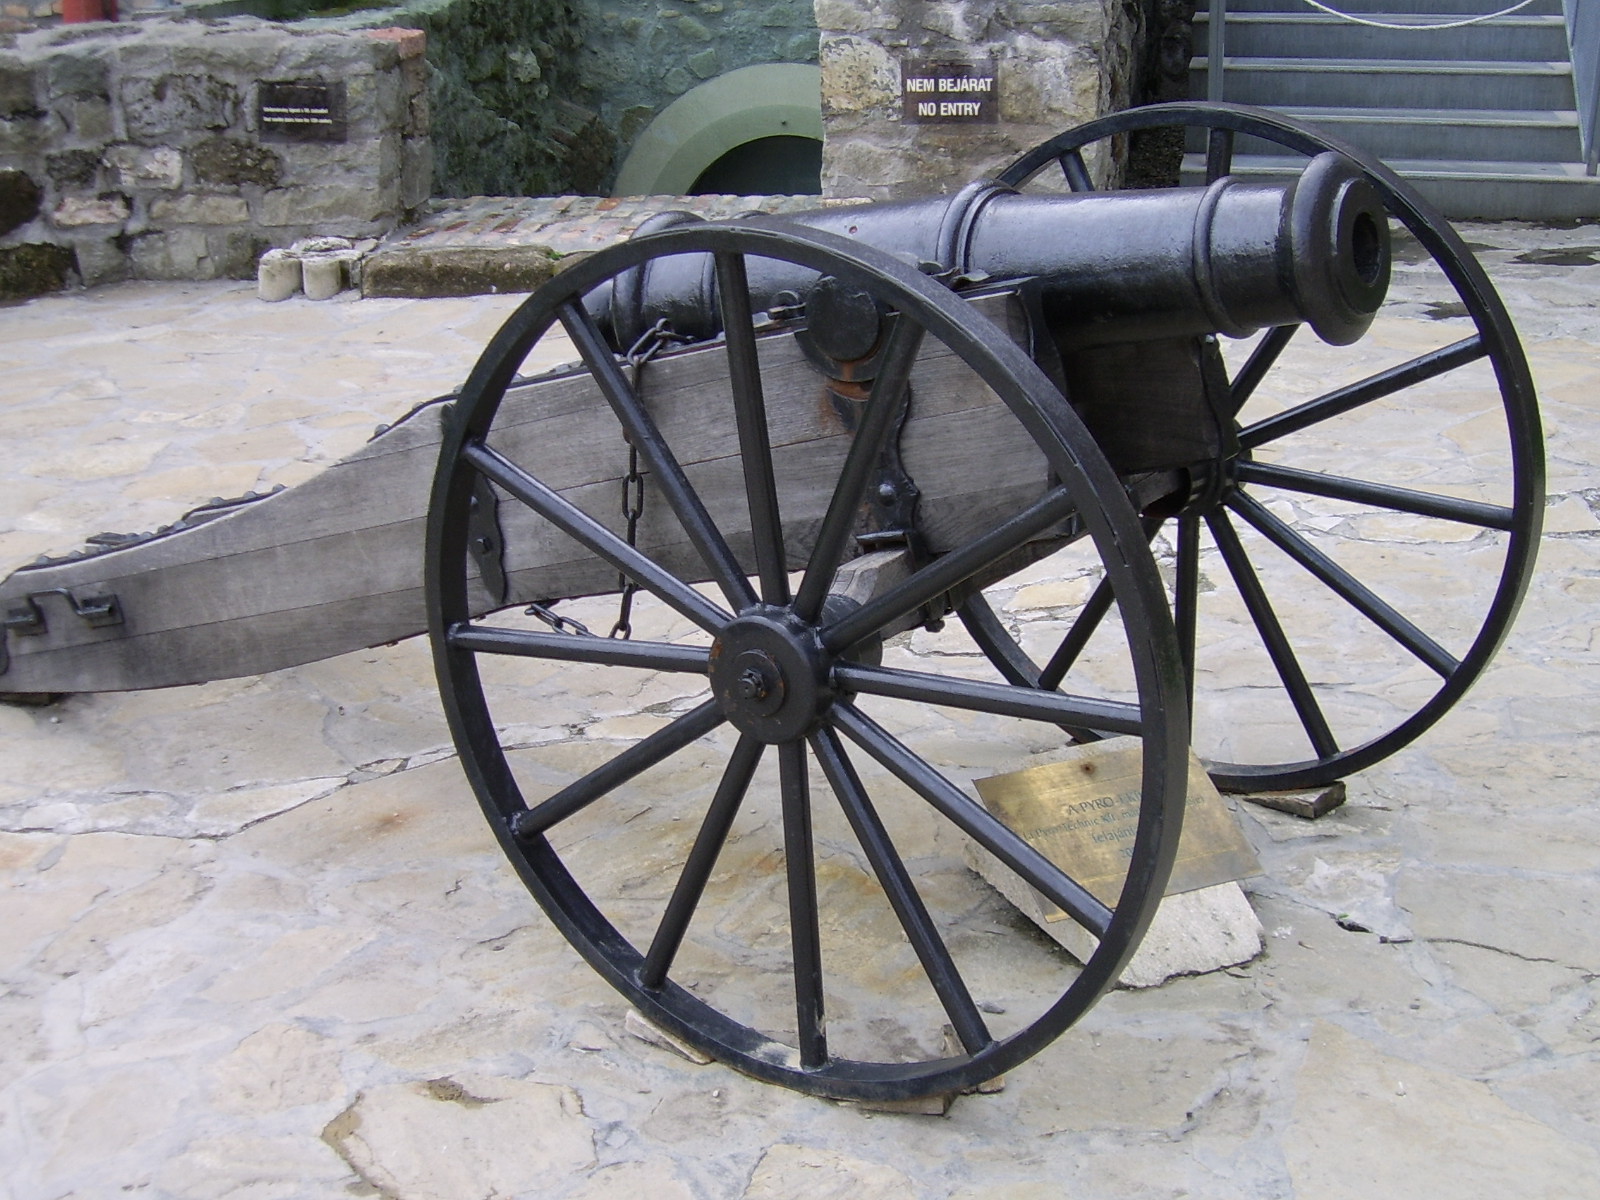 File:Old cannon - panoramio.jpg - Wikimedia Commons